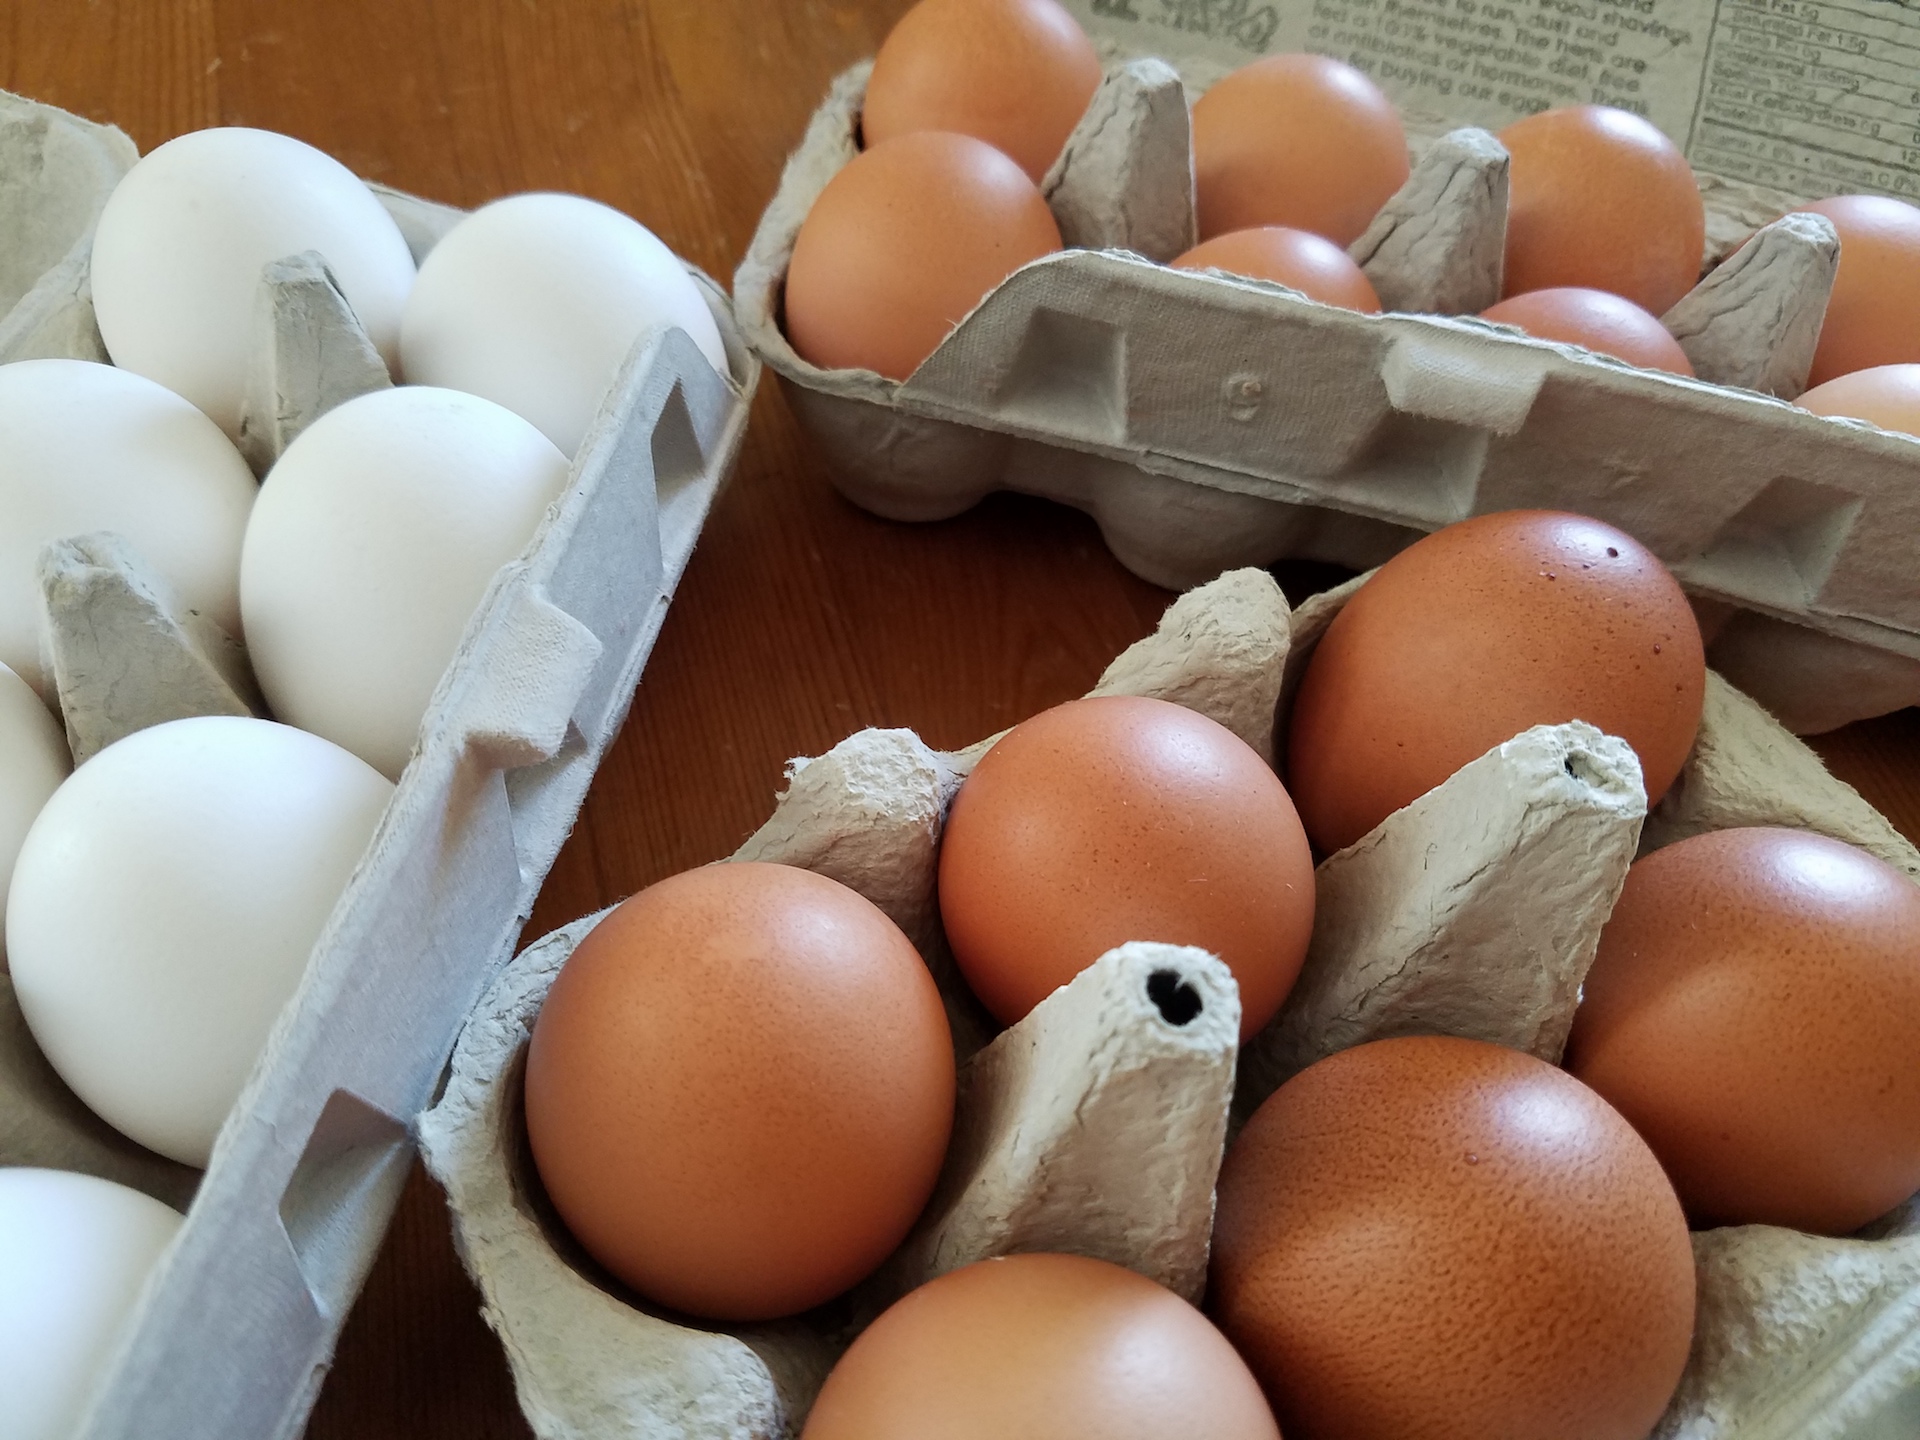 Eggs from Uncle Eddie's, Judy's Family Farm, and Rock Island.